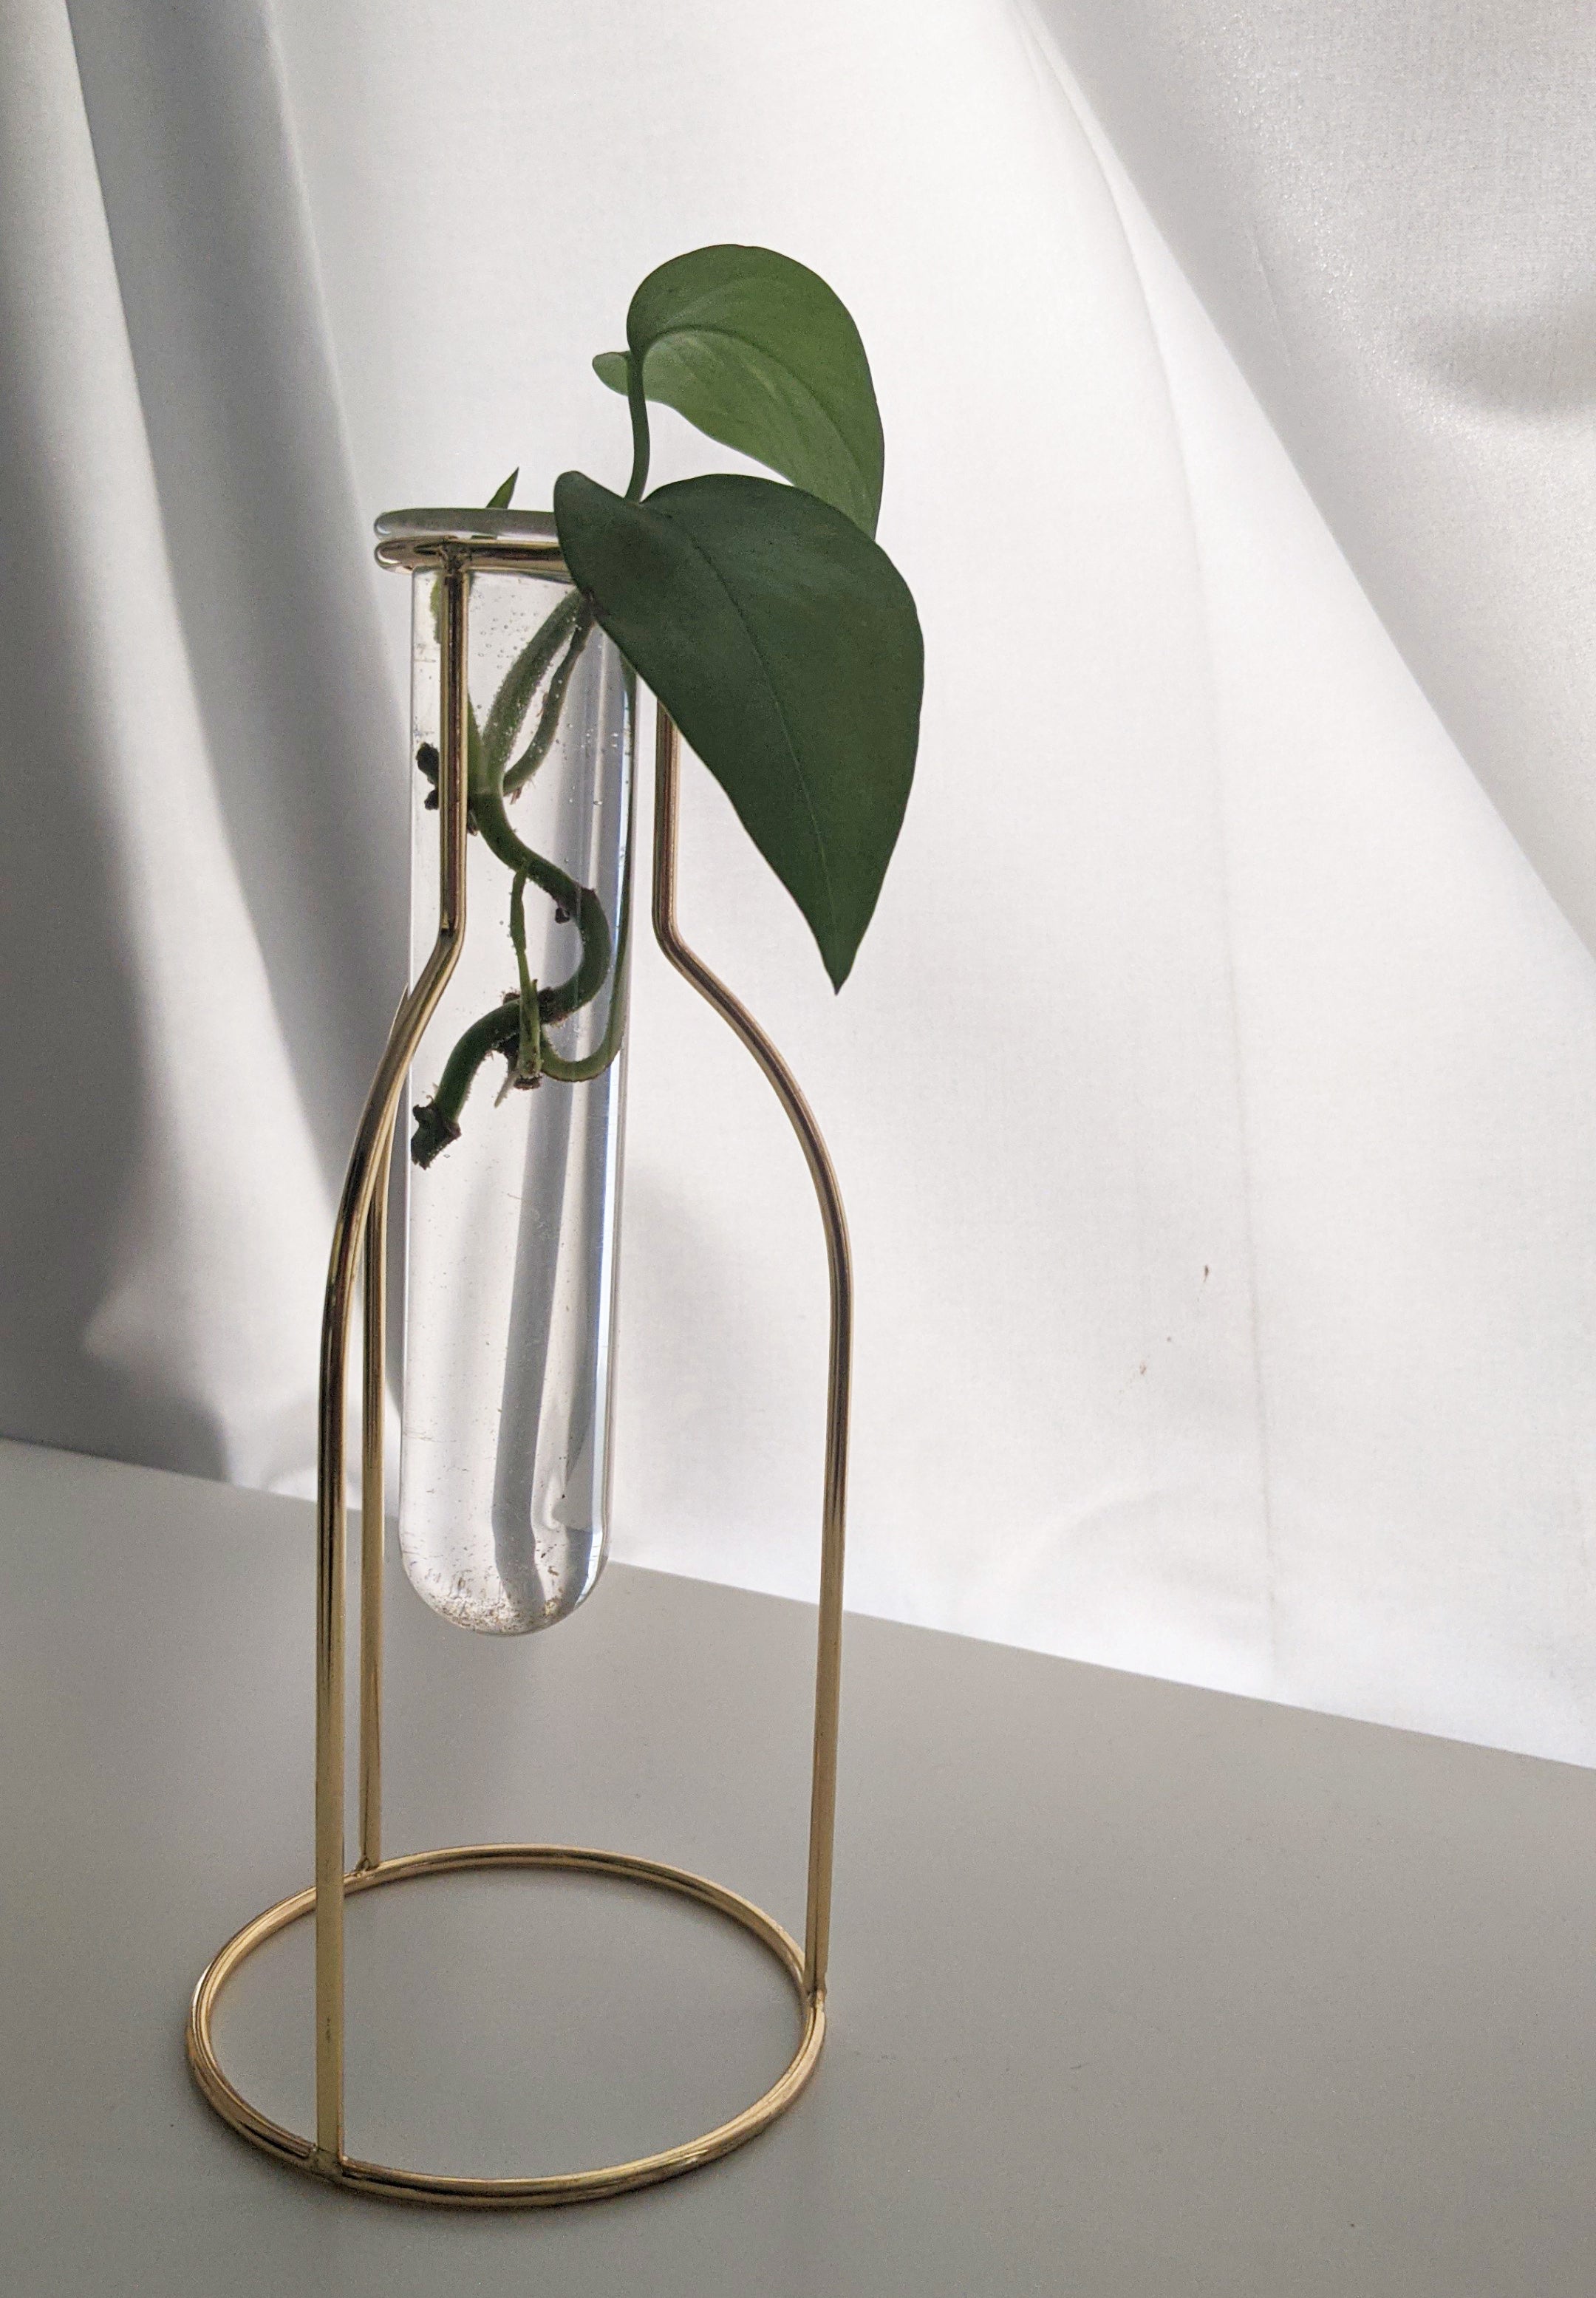 A small glass vial filled with water suspended from a metal holder with plant trimmings inside